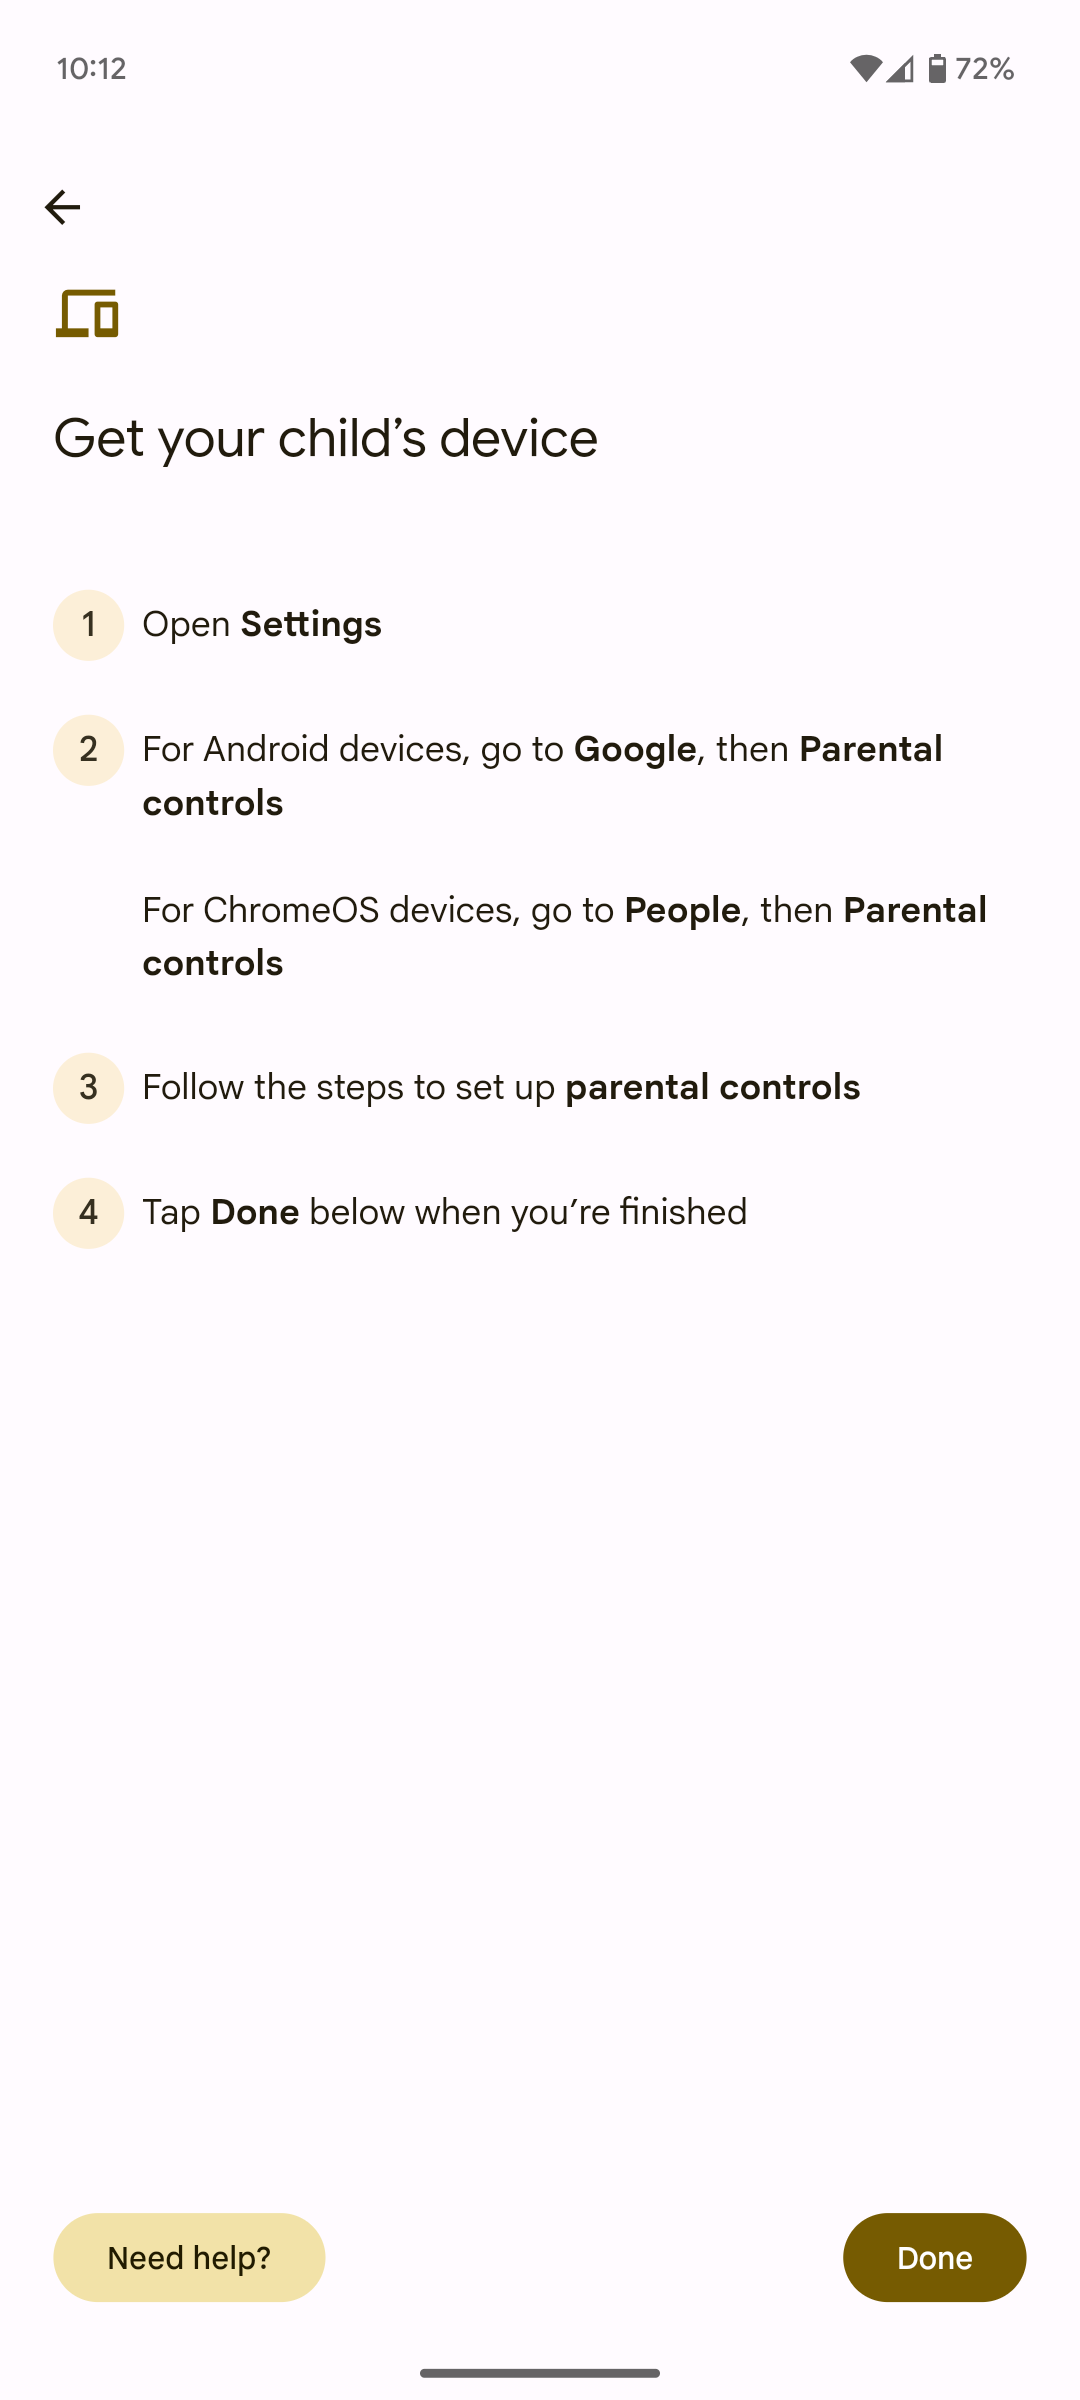 A screenshot of the onboarding screen in the Family Link app